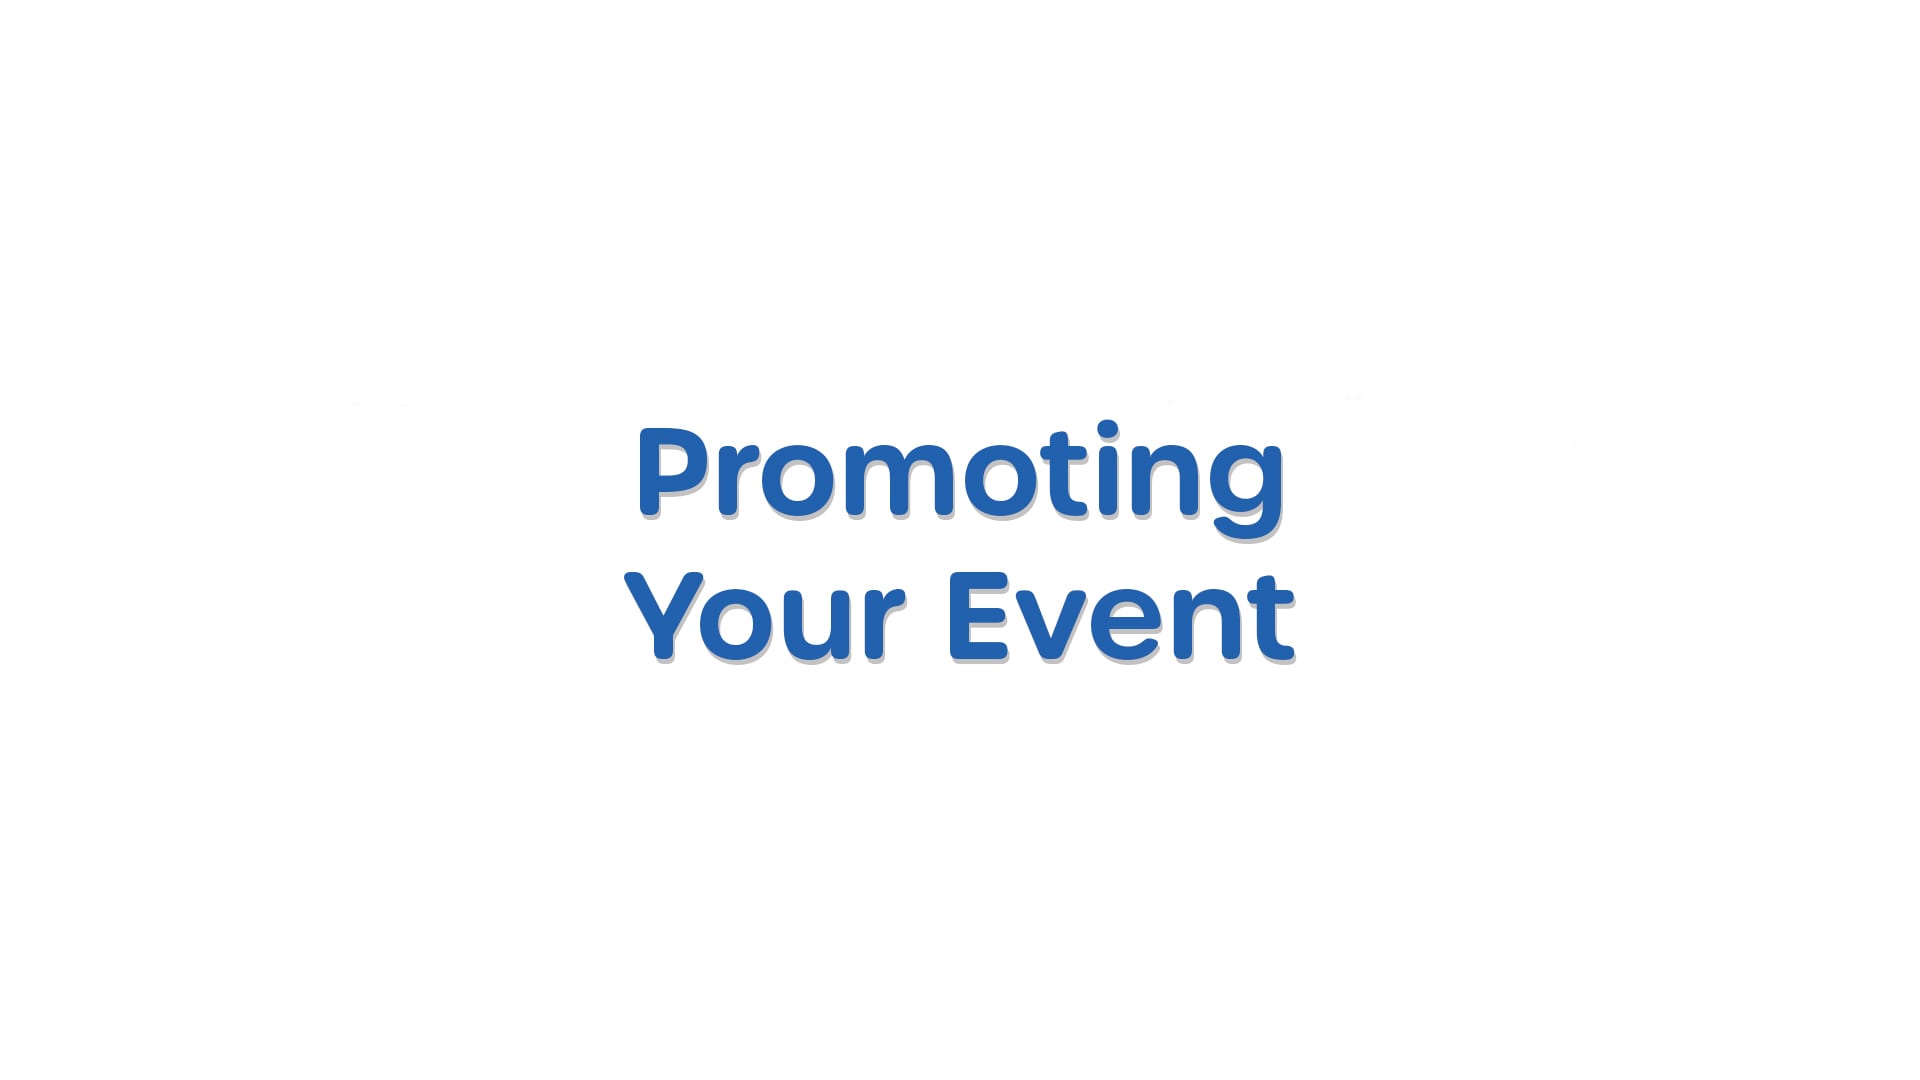 Promoting Your Event Tutorial Video